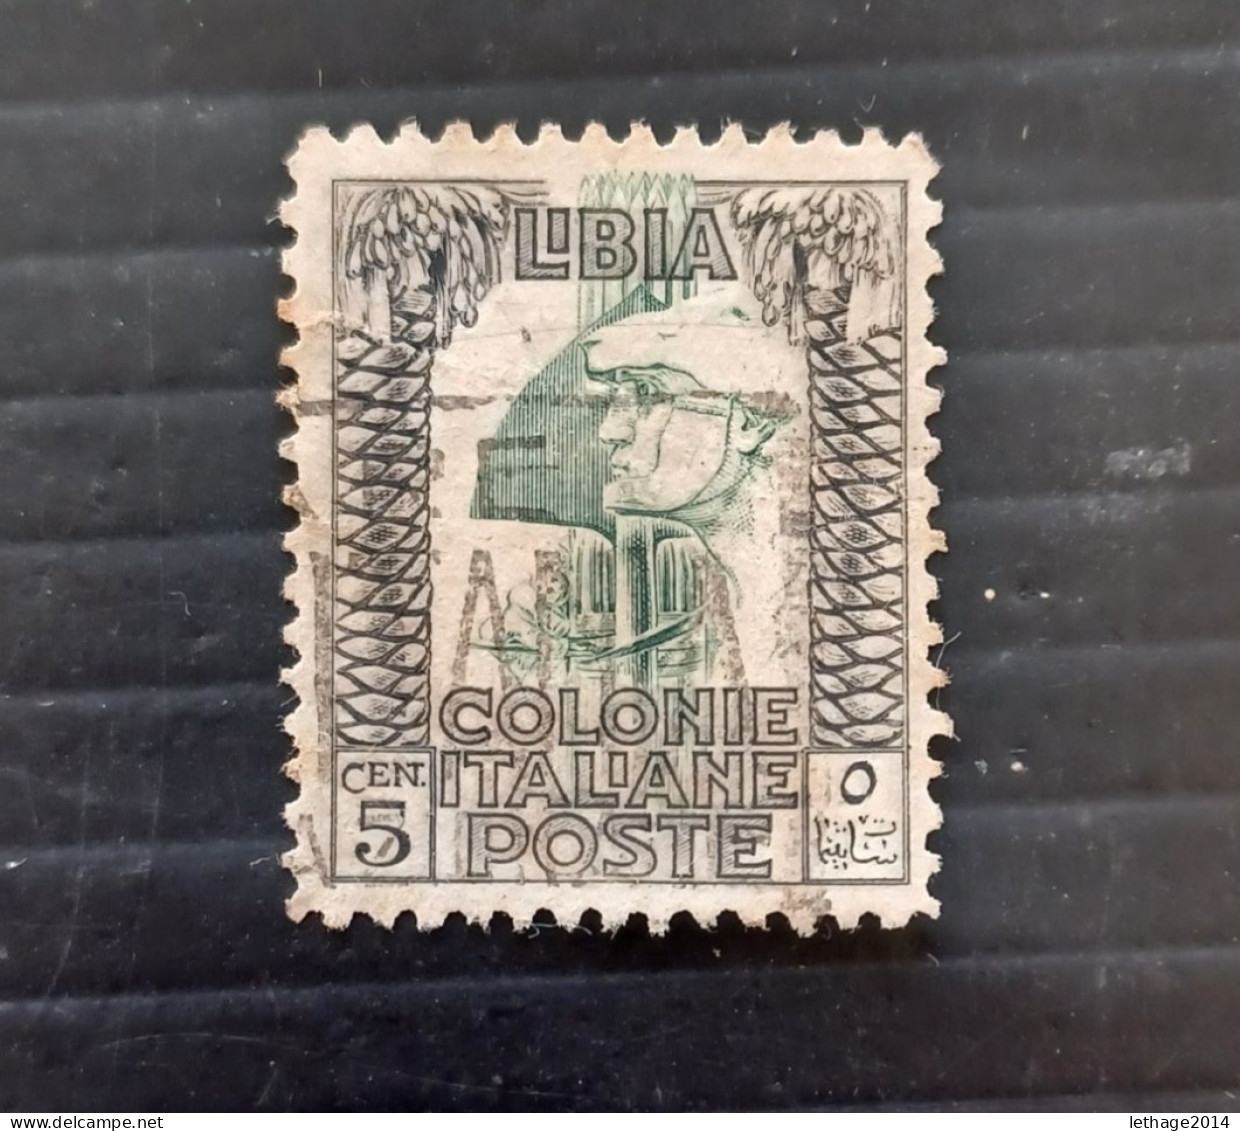 REGNO D ITALIA COLONIE LIBIA 1926 SERIE PITTORICA CAT SASS. N 60  ---- GIULY - Libye